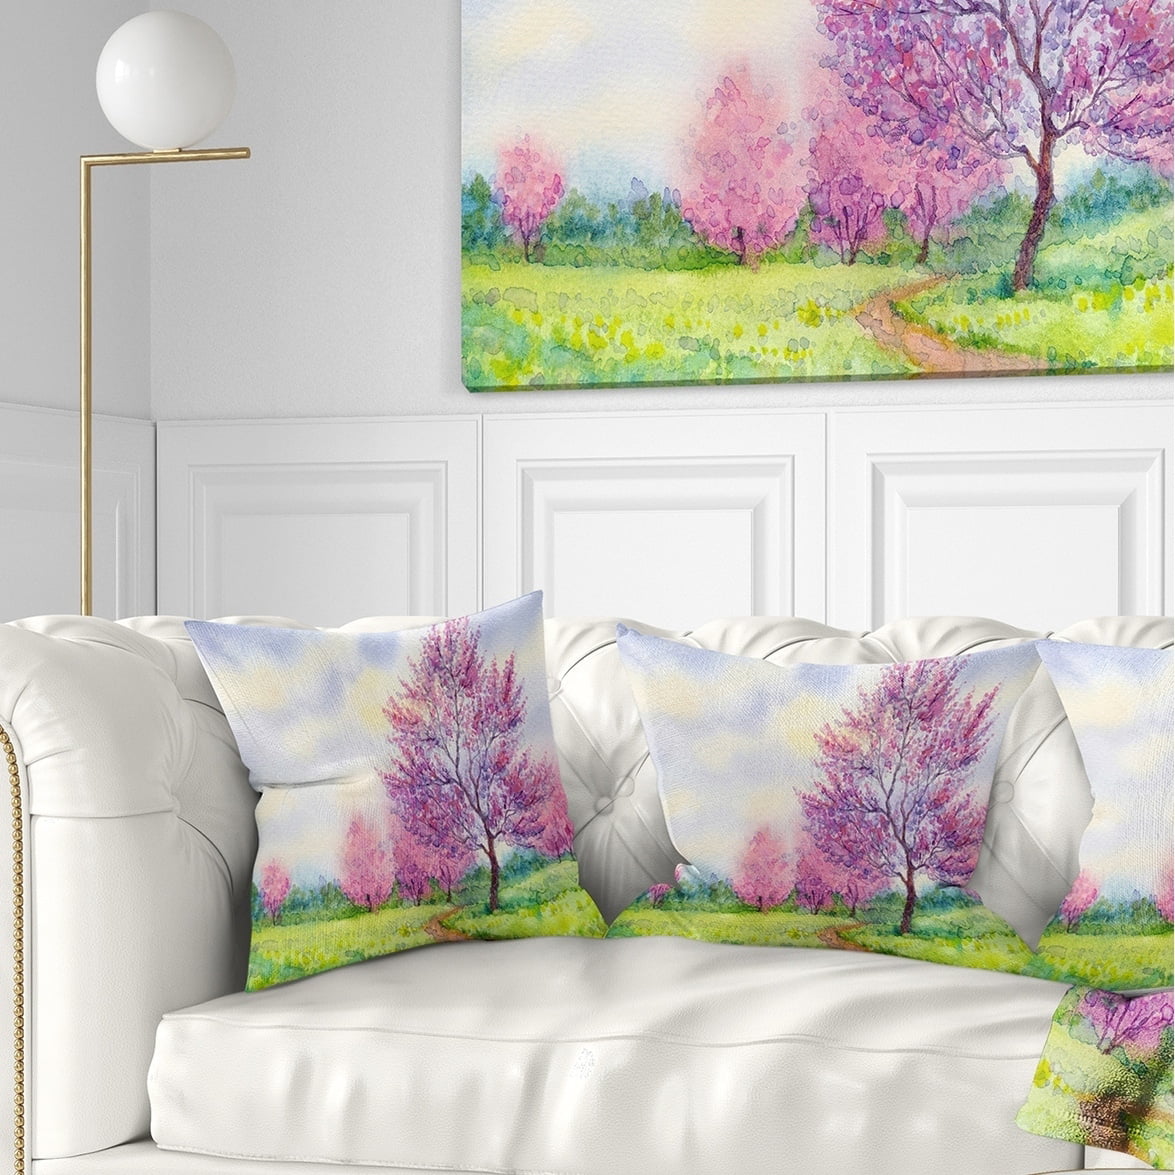 Sofa Throw Pillow 12 in in x 20 in Designart CU6498-12-20 Purple Spring Landscape Floral Lumbar Cushion Cover for Living Room 